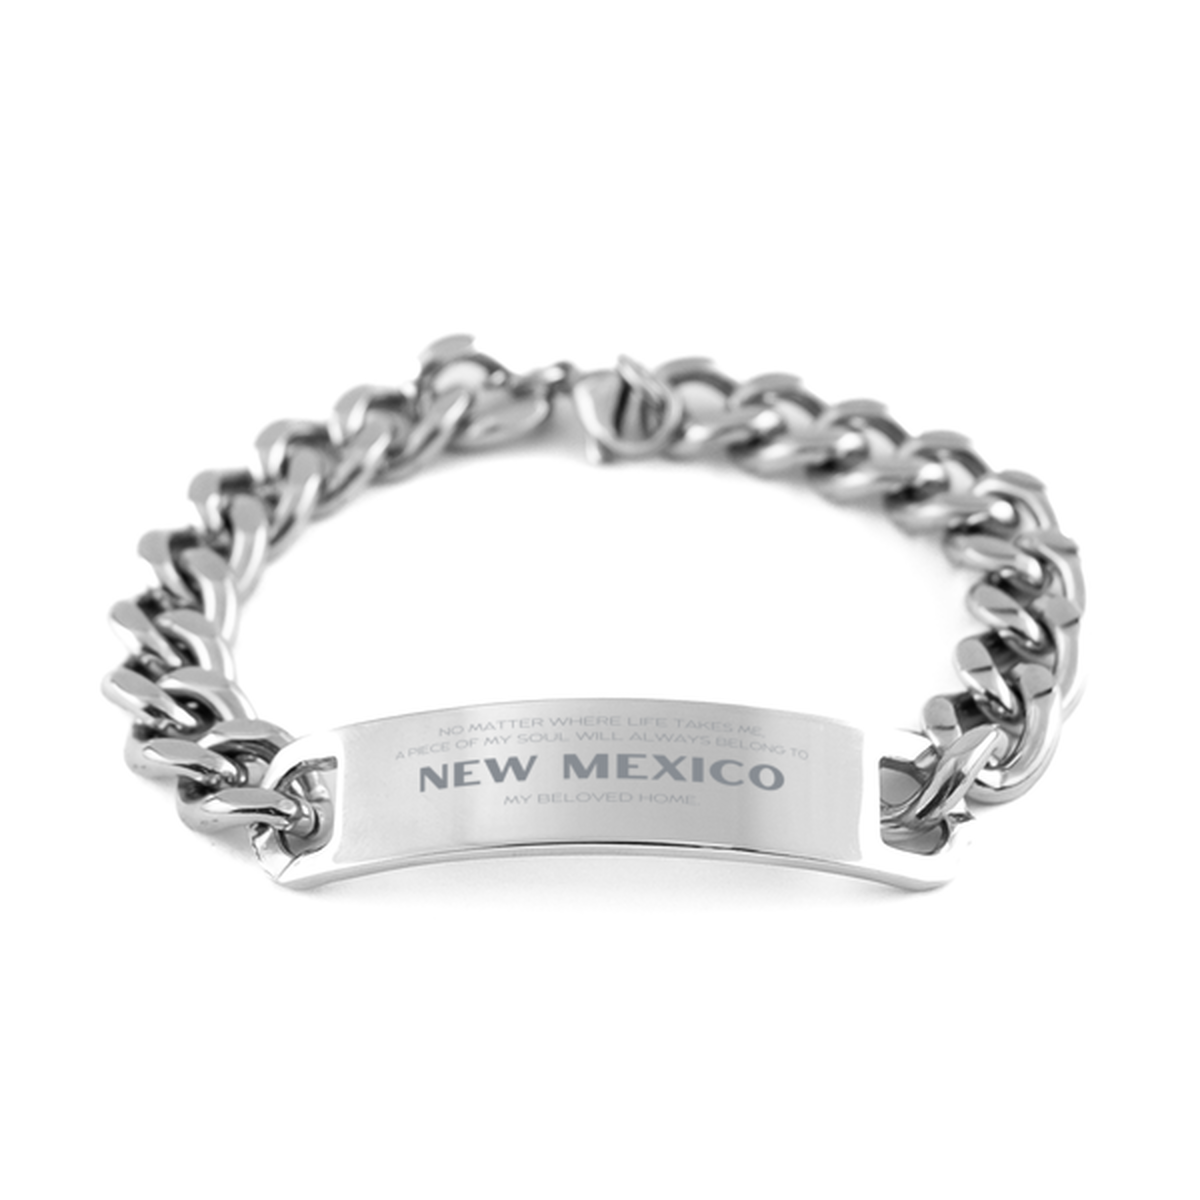 Love New Mexico State Gifts, My soul will always belong to New Mexico, Proud Cuban Chain Stainless Steel Bracelet, Birthday Unique Gifts For New Mexico Men, Women, Friends